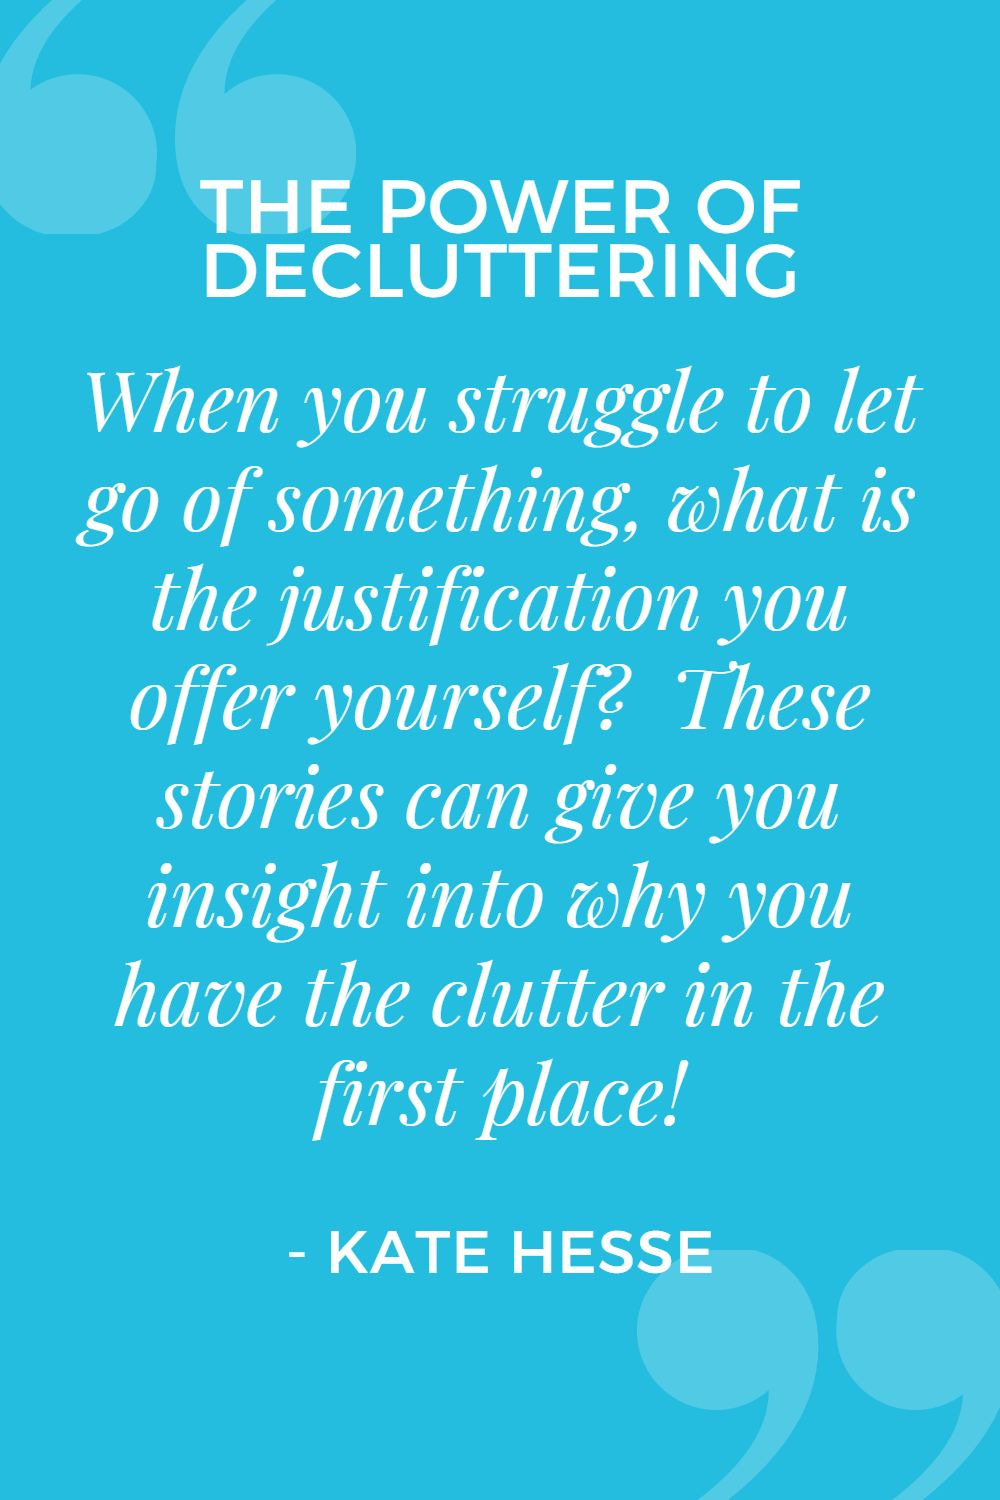 When you struggle to let go of something, what is the justification you offer yourself? These stories can give you insight into why you have the clutter in the first place!